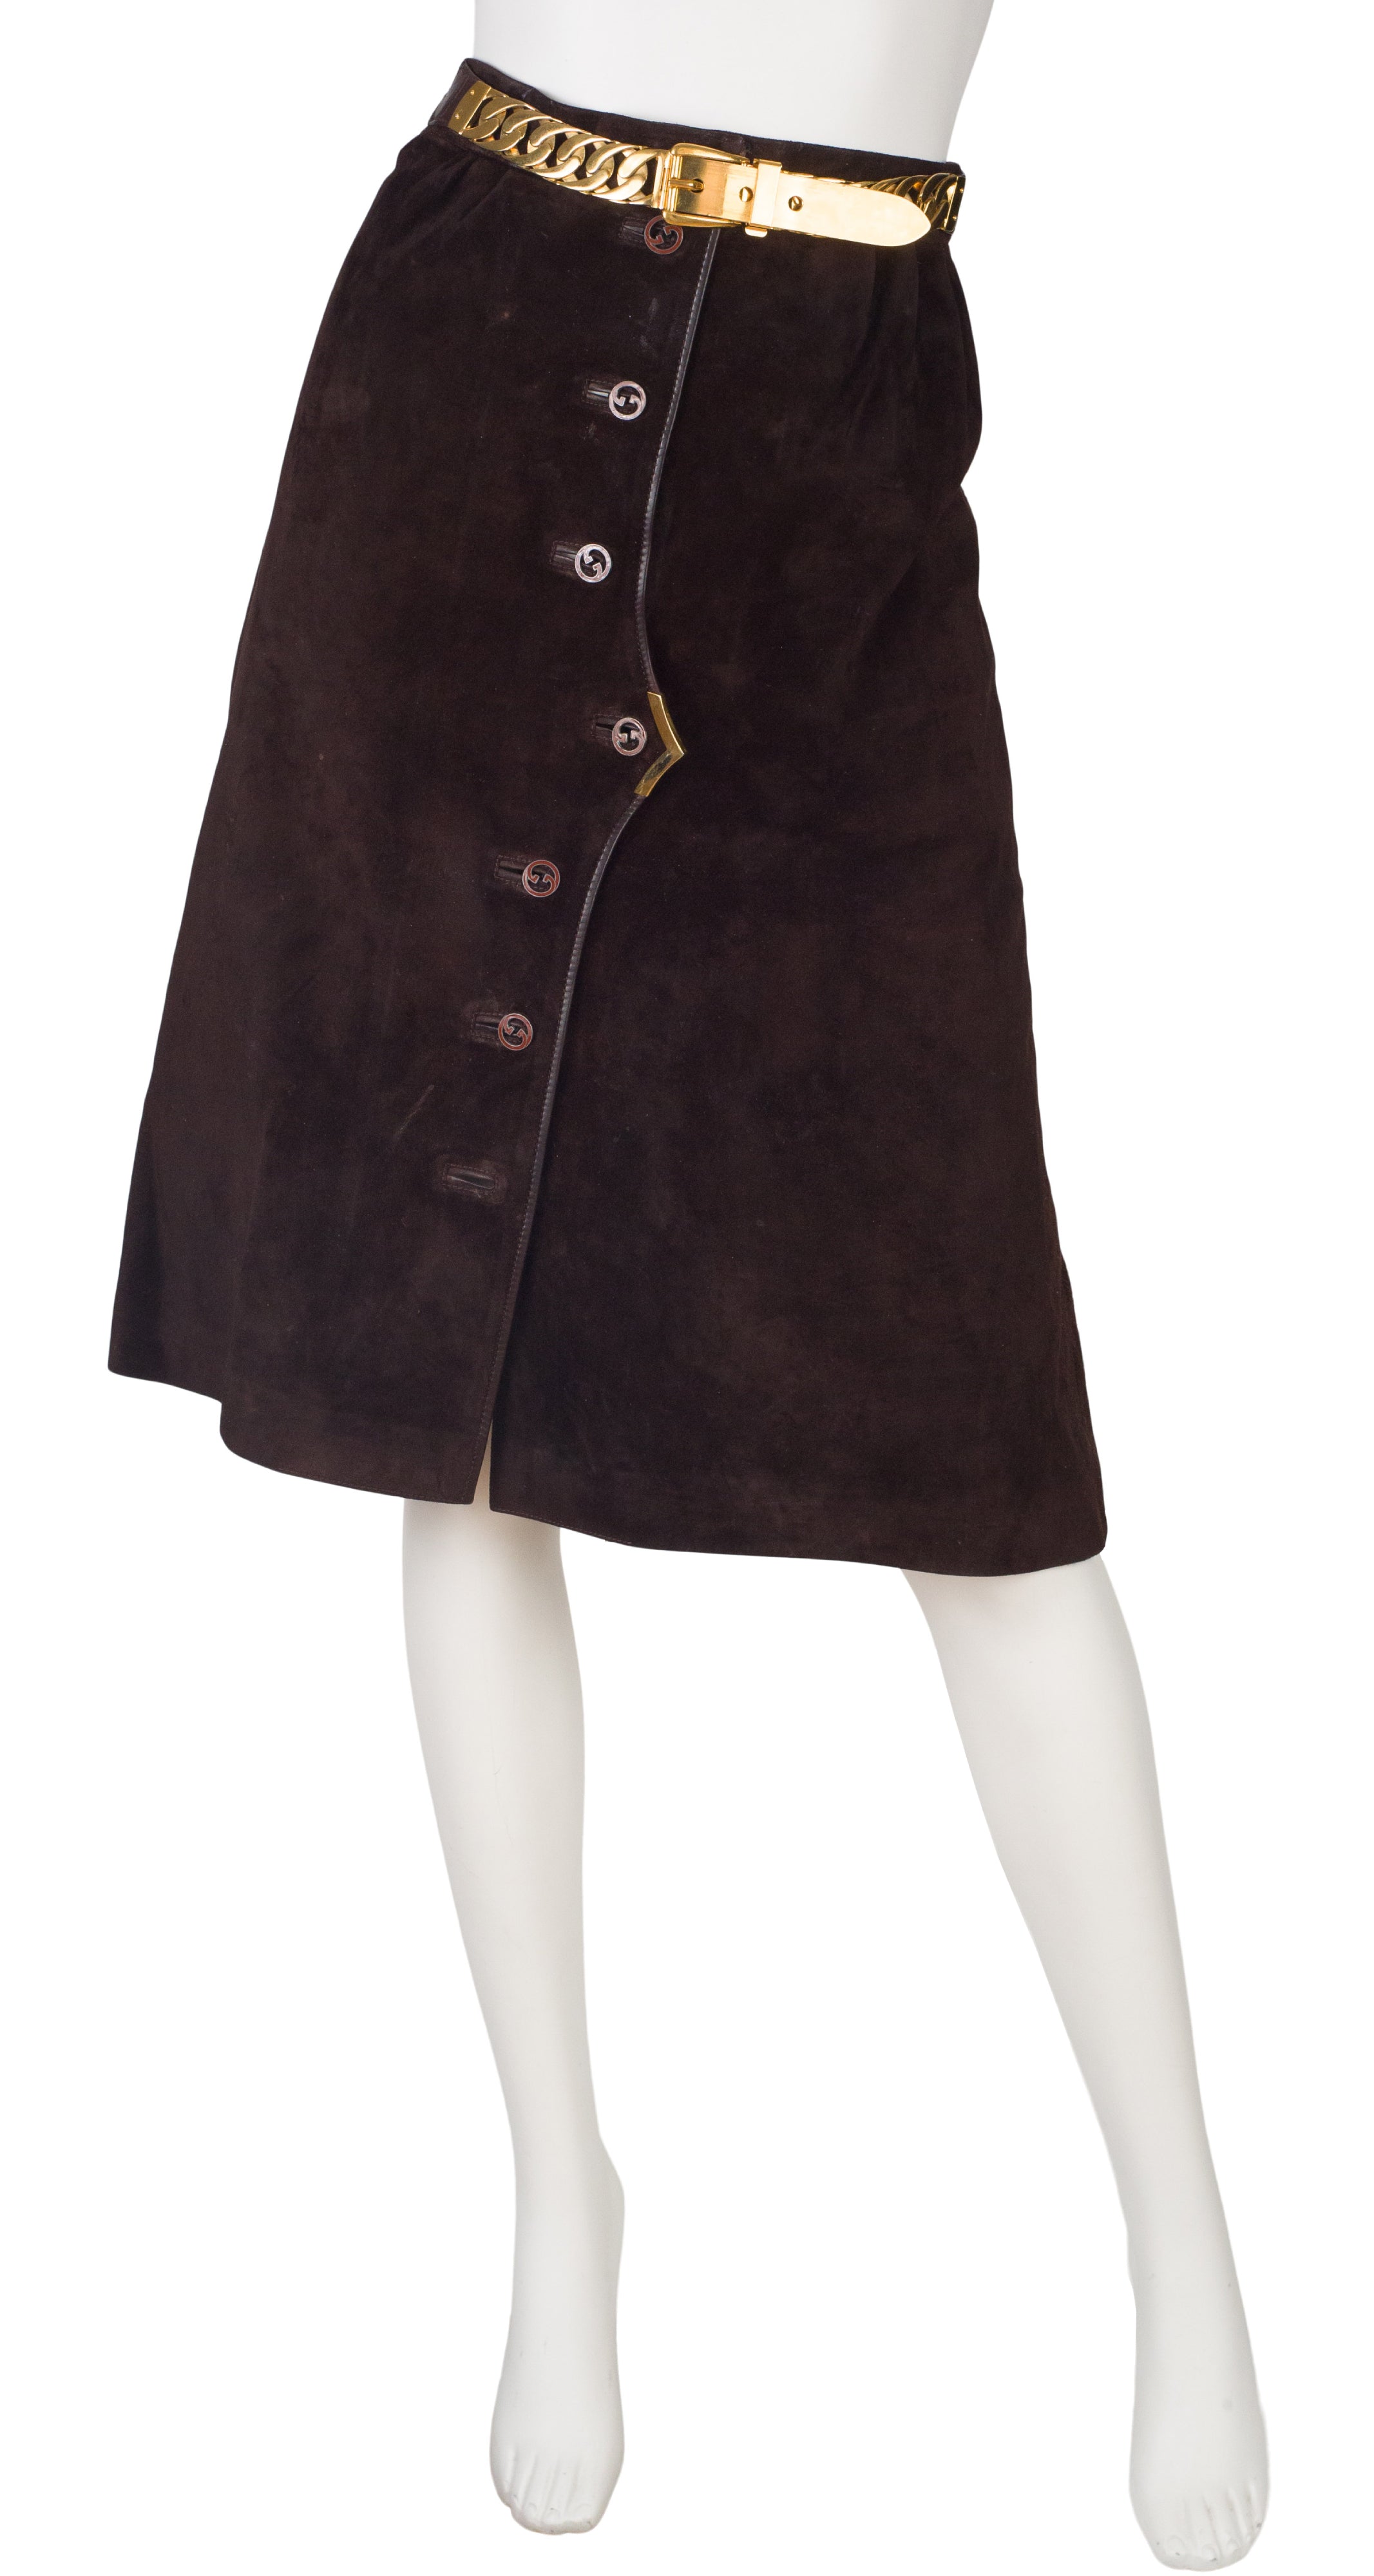 1970s "GG" Button Brown Suede A-Line Skirt